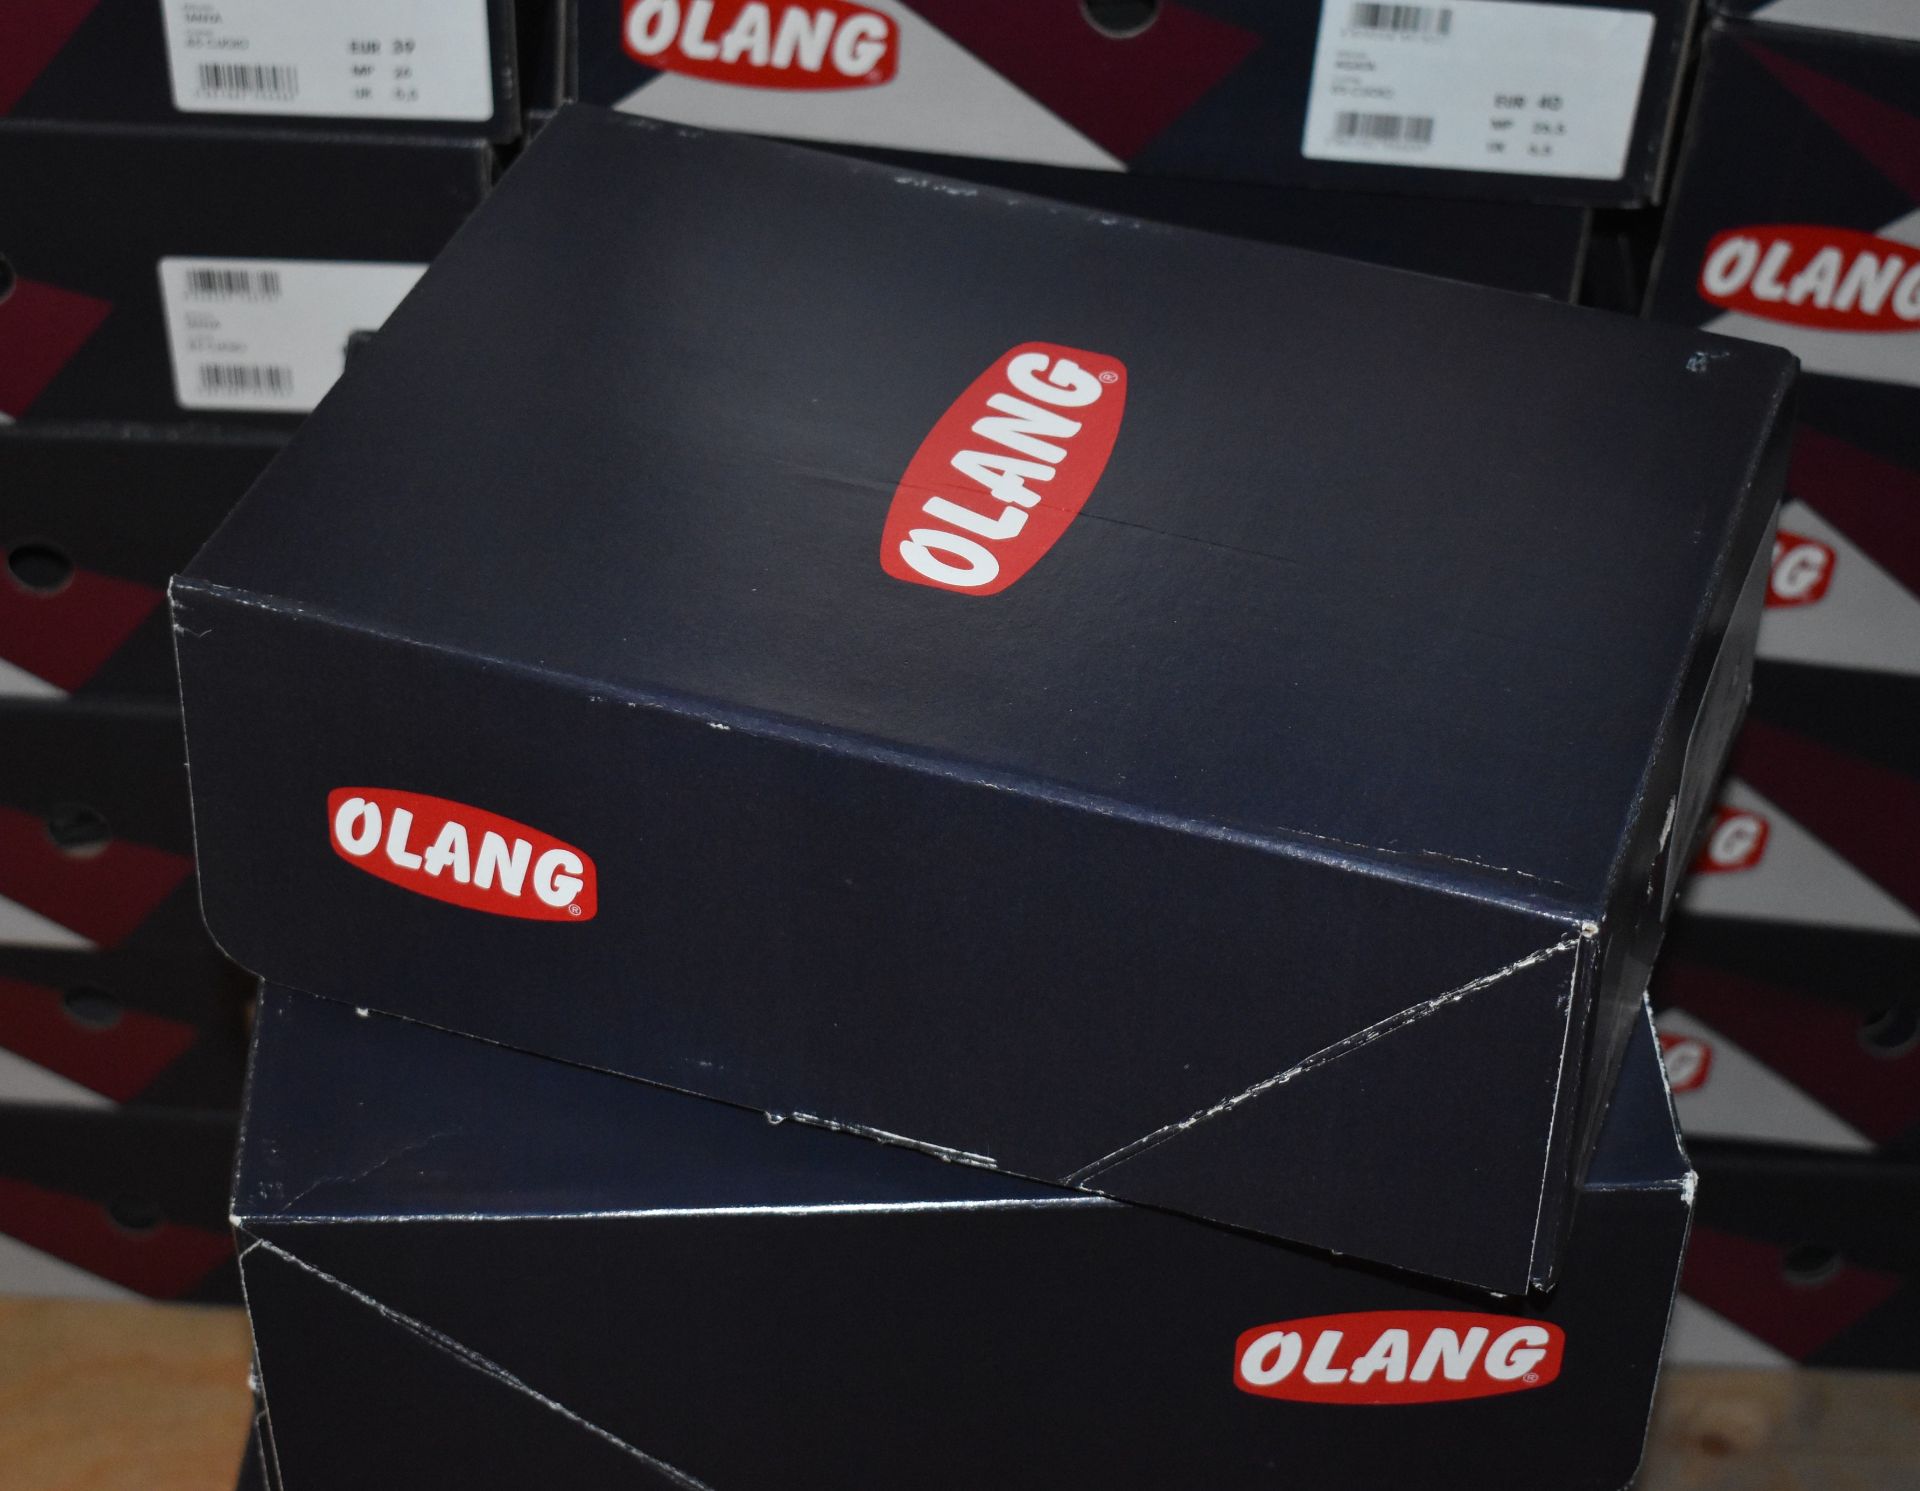 1 x Pair of Designer Olang Merano 82 Blu Women's Winter Boots - Euro Size 39 - Brand New Boxed Stock - Image 4 of 4